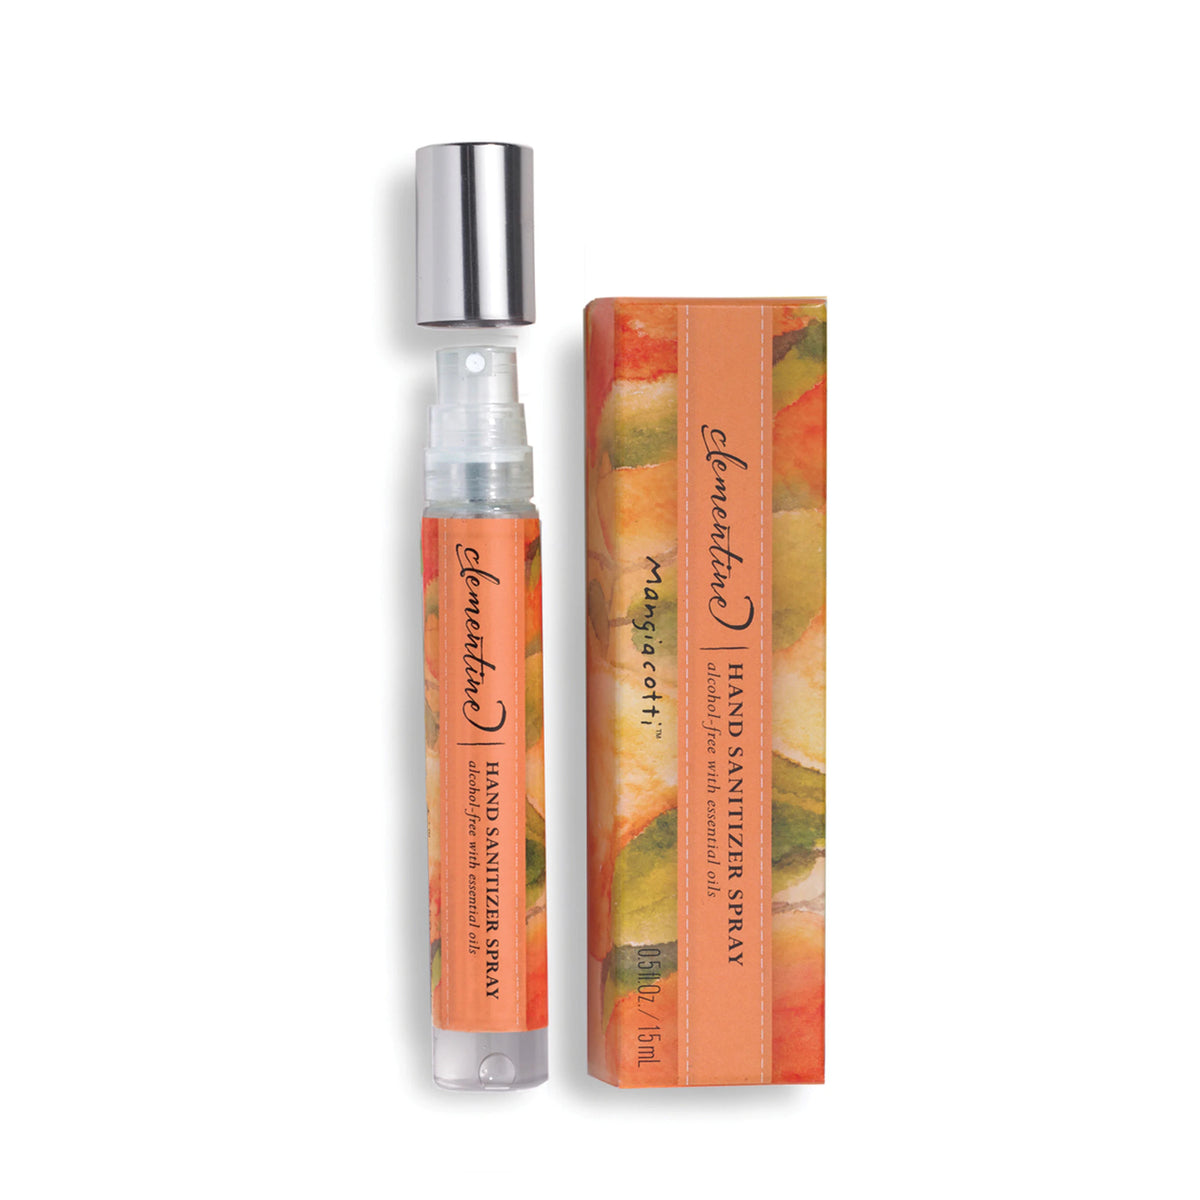 A spray bottle of Mangiacotti Clementine Hand Sanitizer Spray next to its packaging box with floral prints. The clear bottle displays orange-text Mangiacotti branding and is partially filled with pink liquid.